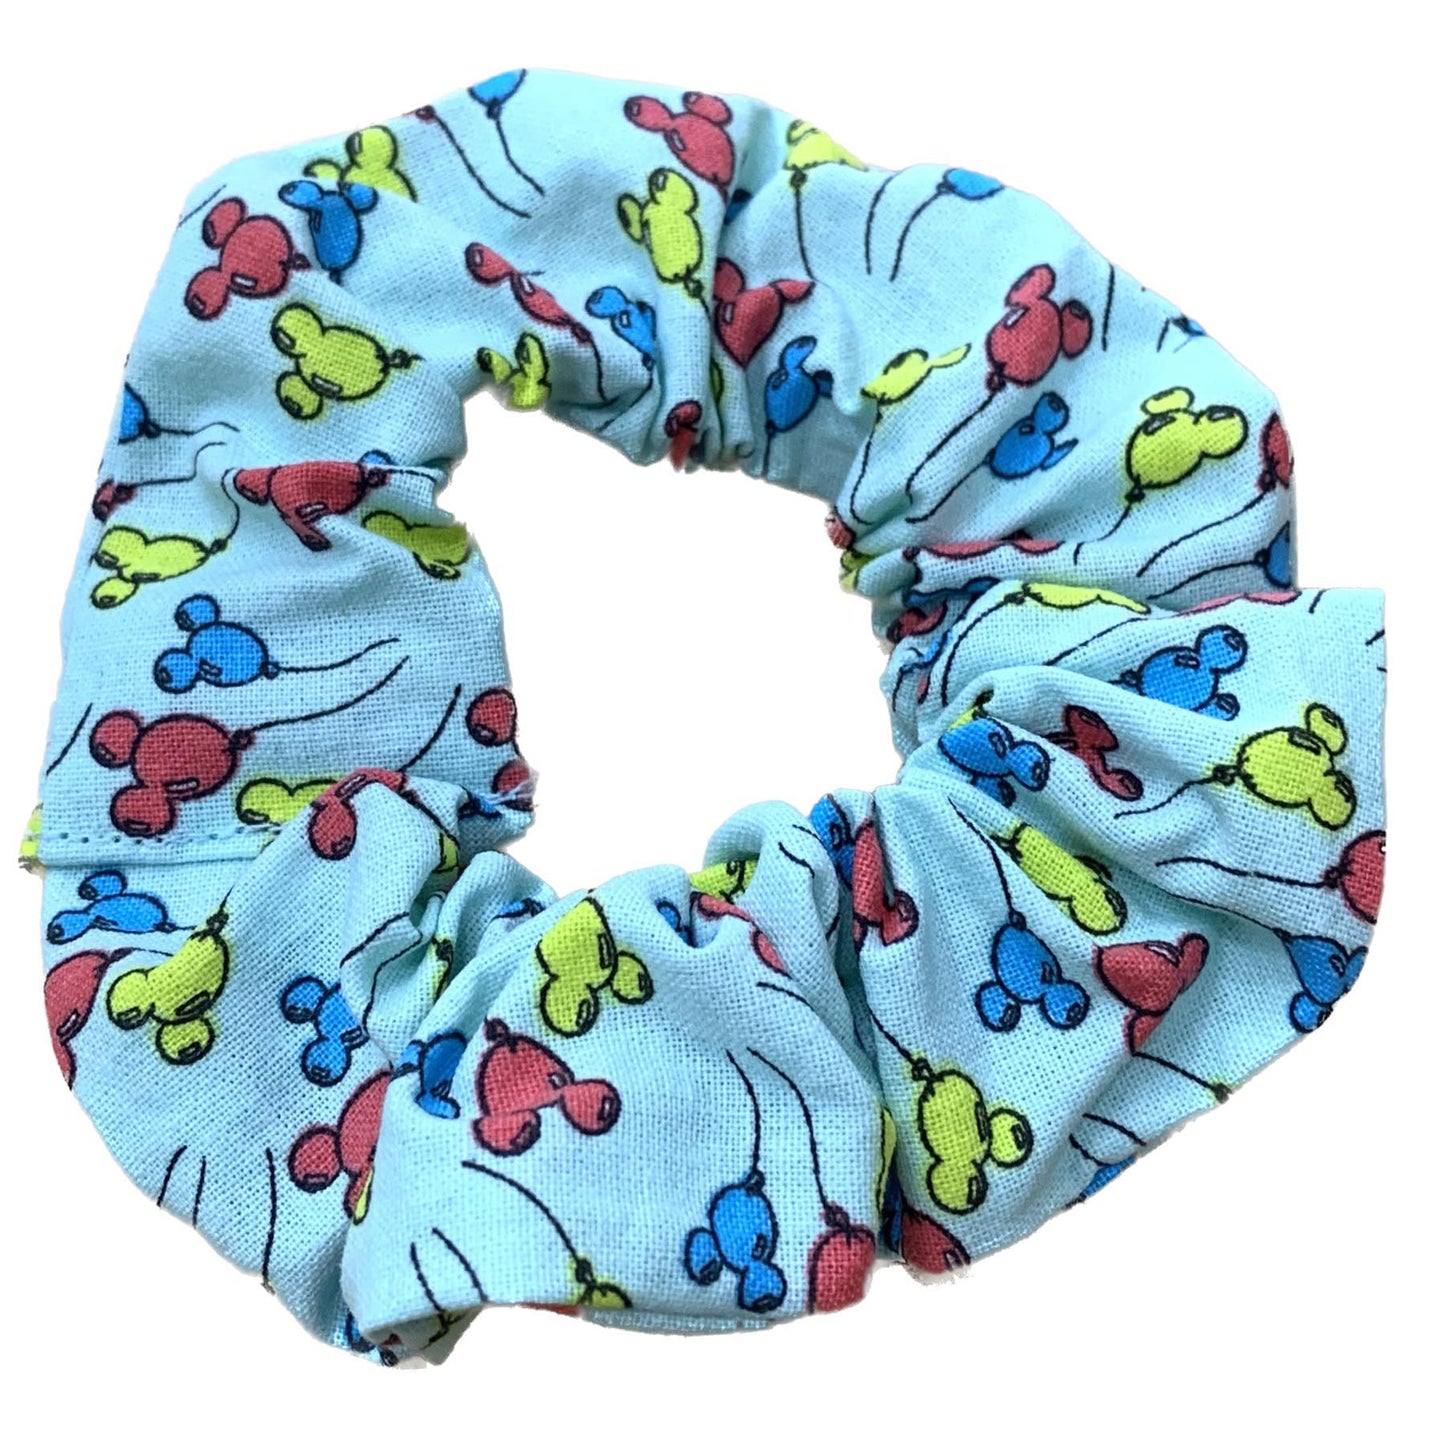 MAKIN' WHOOPEE - "Mickey Mouse Balloons" REGULAR SCRUNCHIES